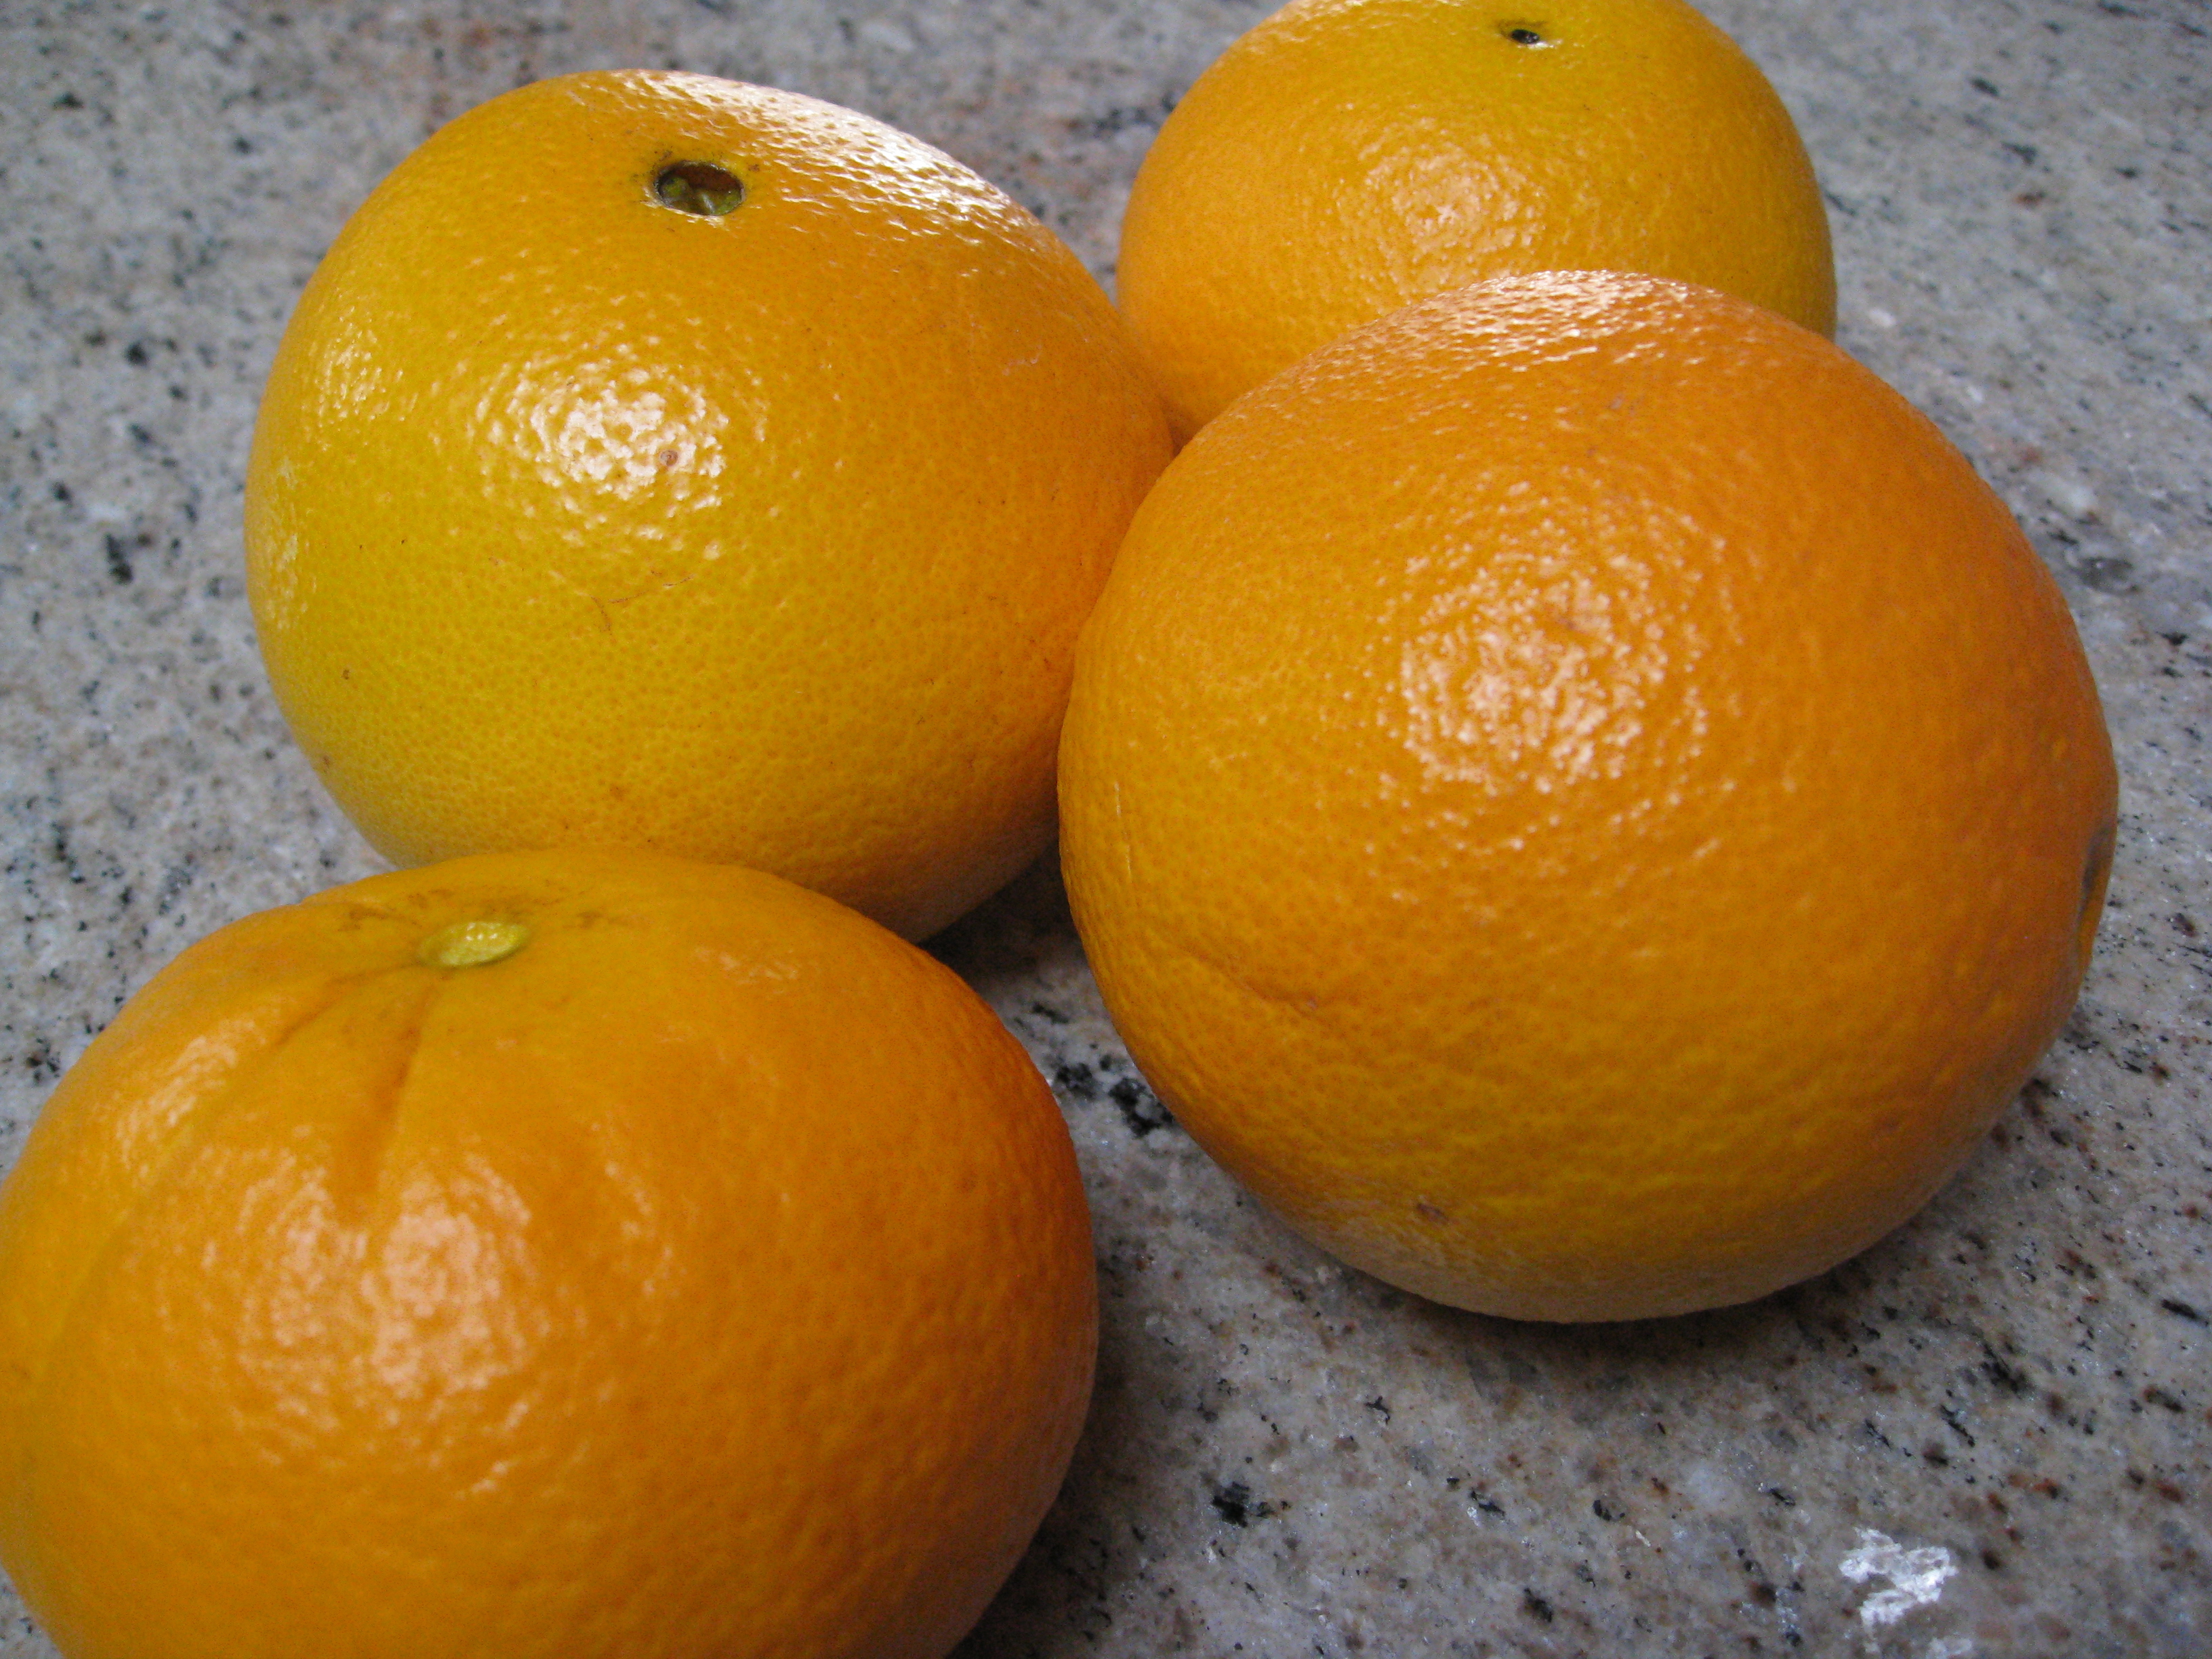 Fresh oranges from our tree